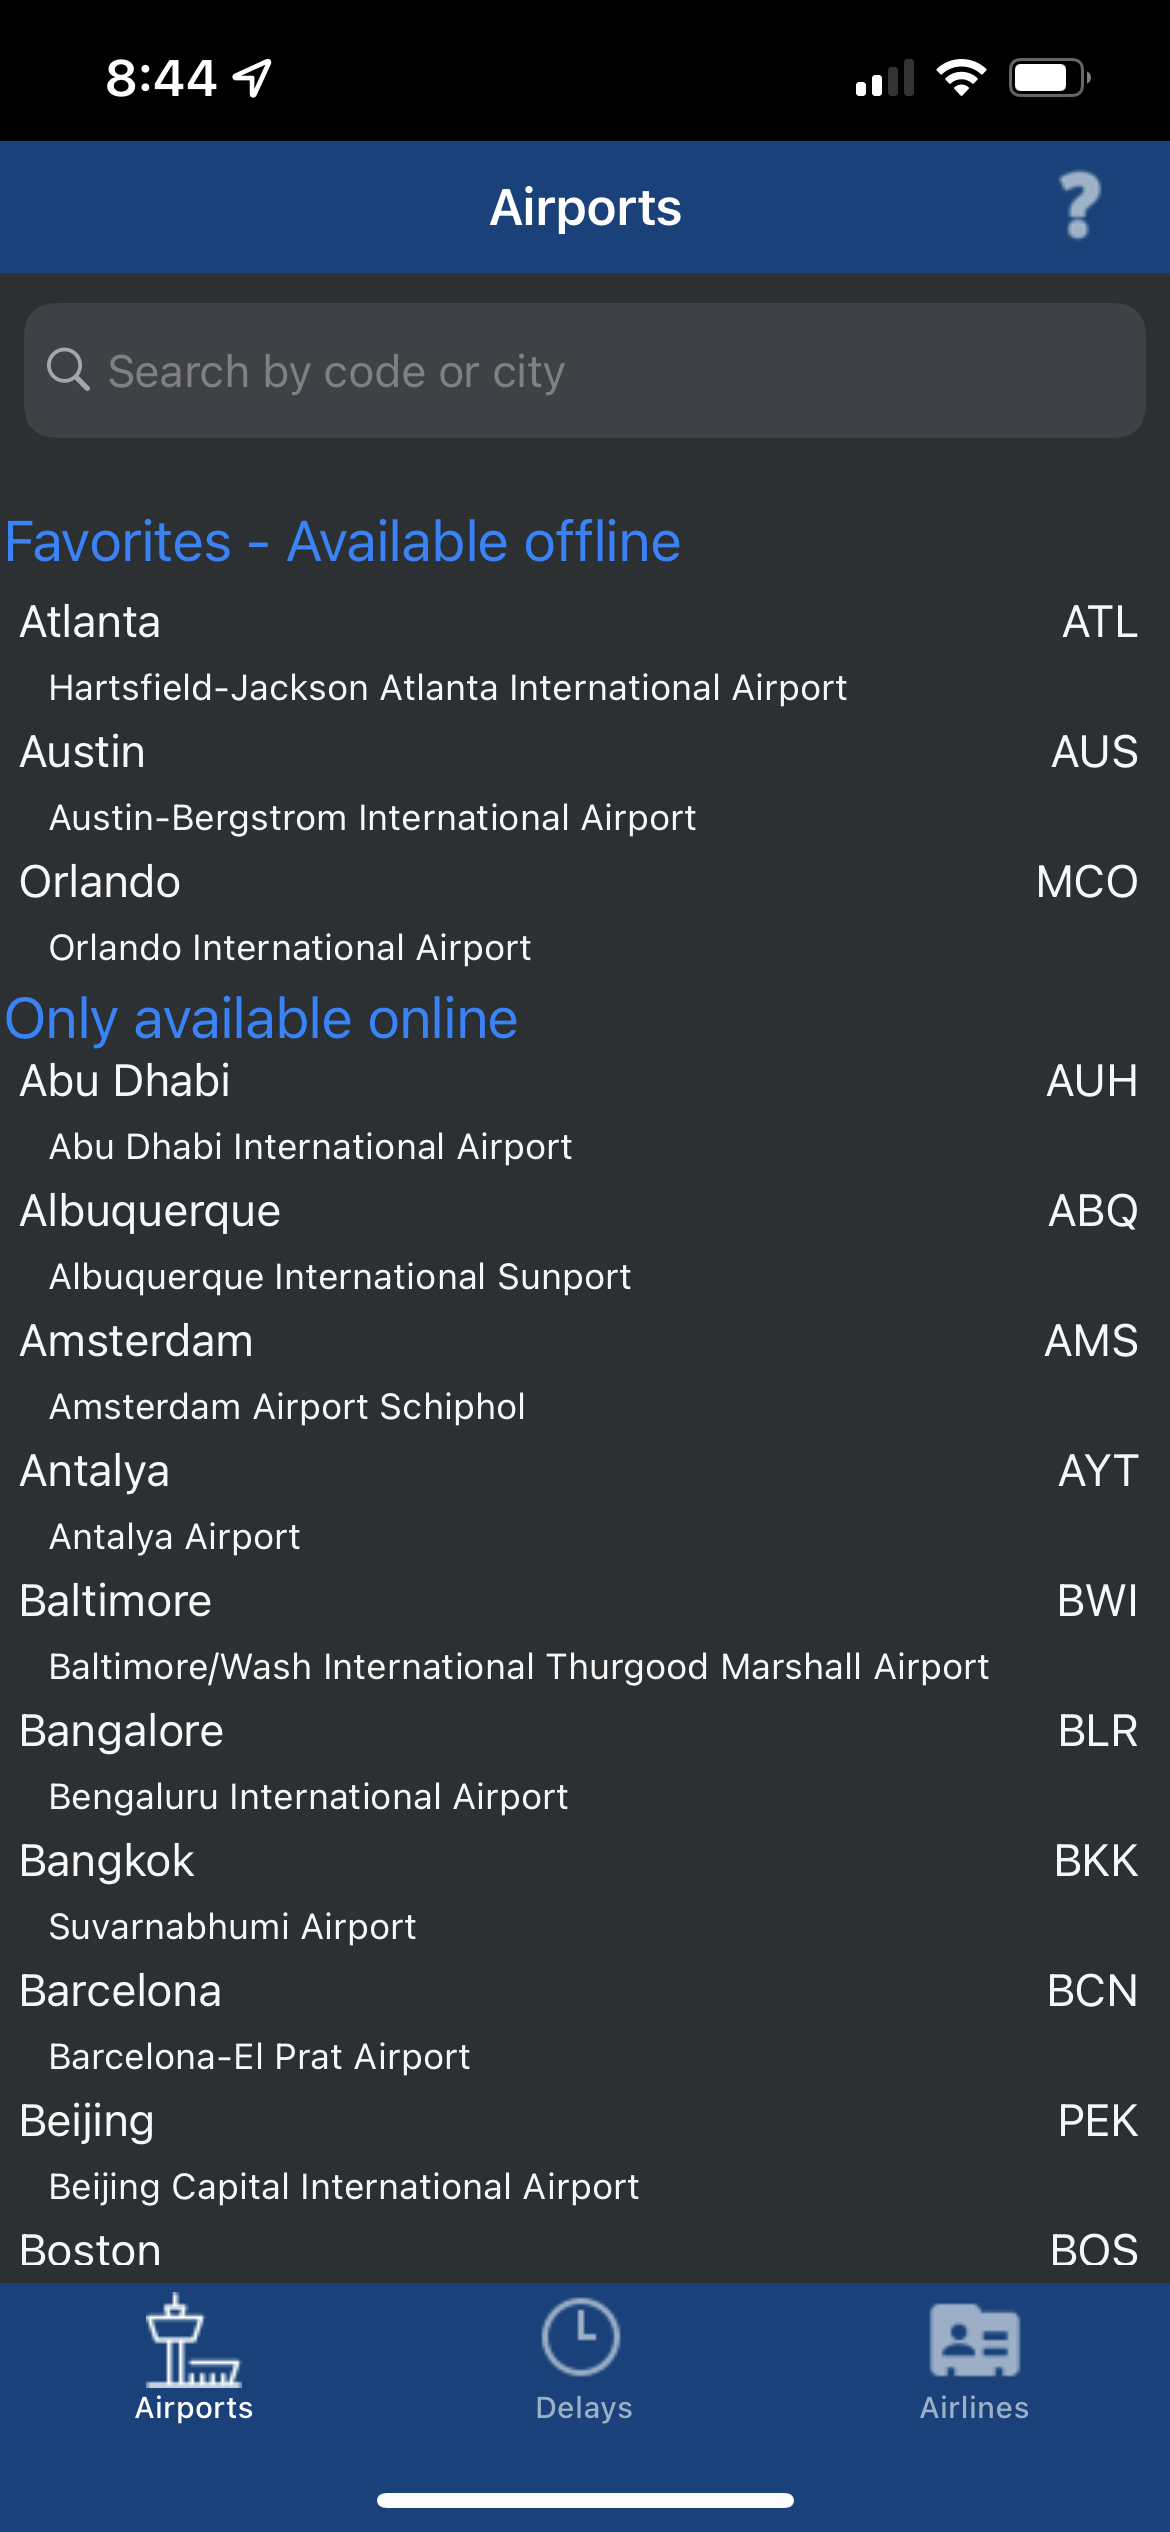 The app has information about more than 90 airports around the world!